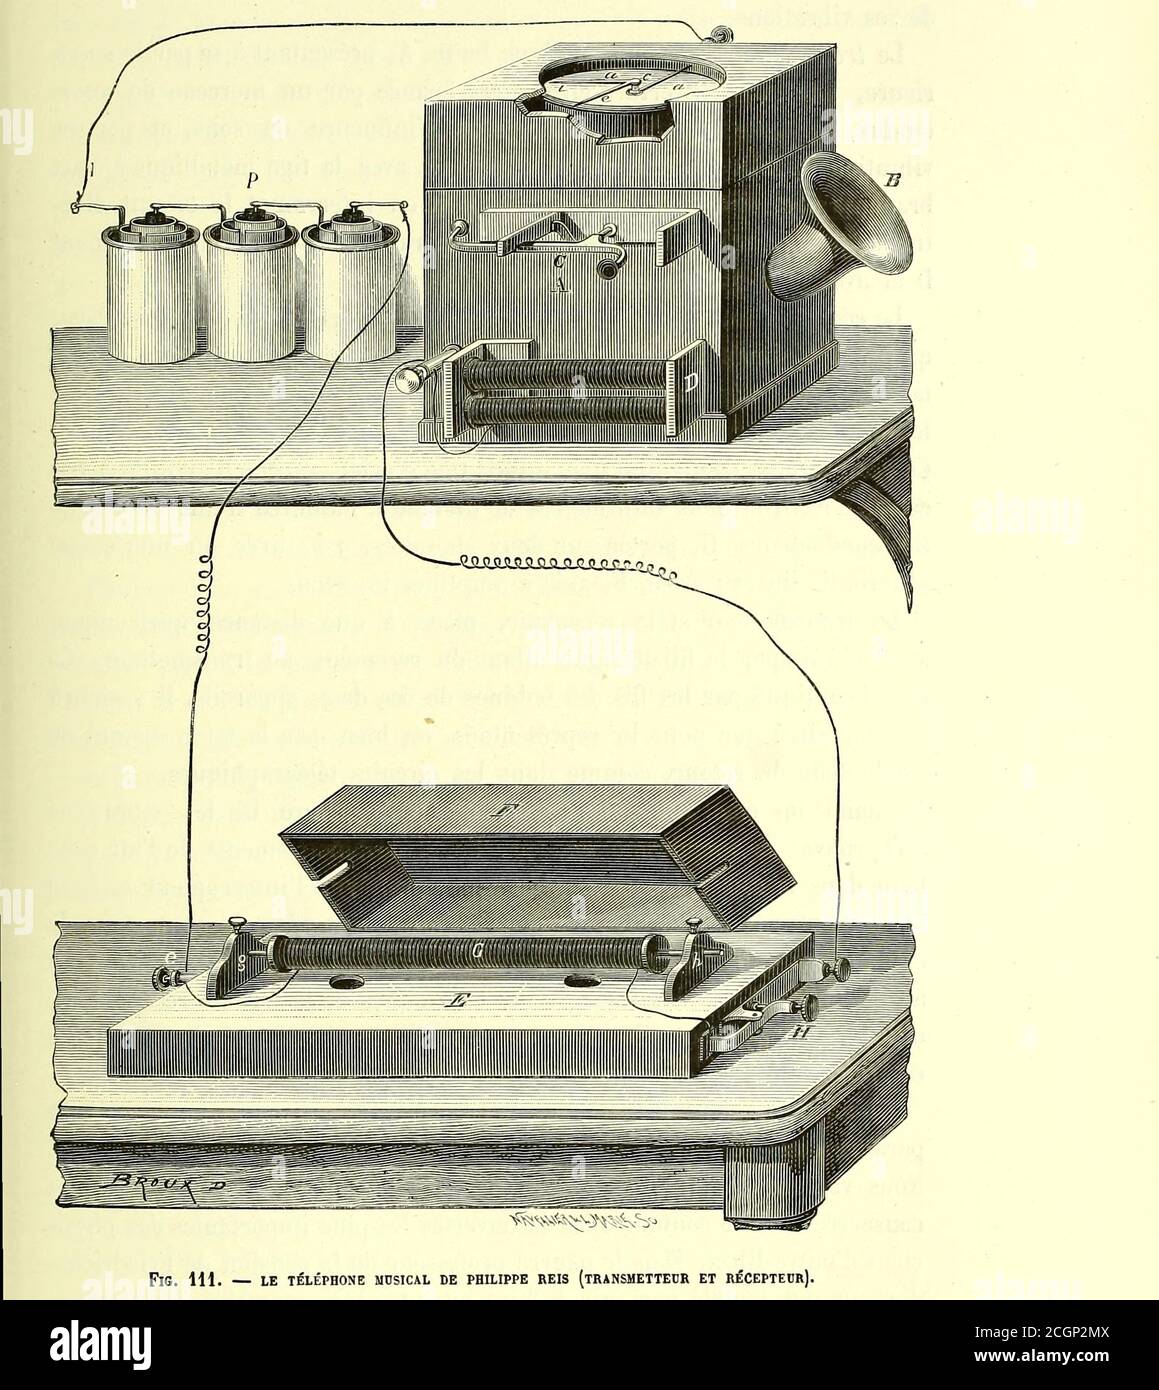 The Reis Telephone Transmitter and Receiver. Johann Philipp Reis (January 7, 1834 – January 14, 1874) was a self-taught German scientist and inventor. In 1861, he constructed the first make-and-break telephone, today called the Reis telephone. From the Book Les merveilles de la science, ou Description populaire des inventions modernes [The Wonders of Science, or Popular Description of Modern Inventions] by Figuier, Louis, 1819-1894 Published in Paris 1867 Stock Photo